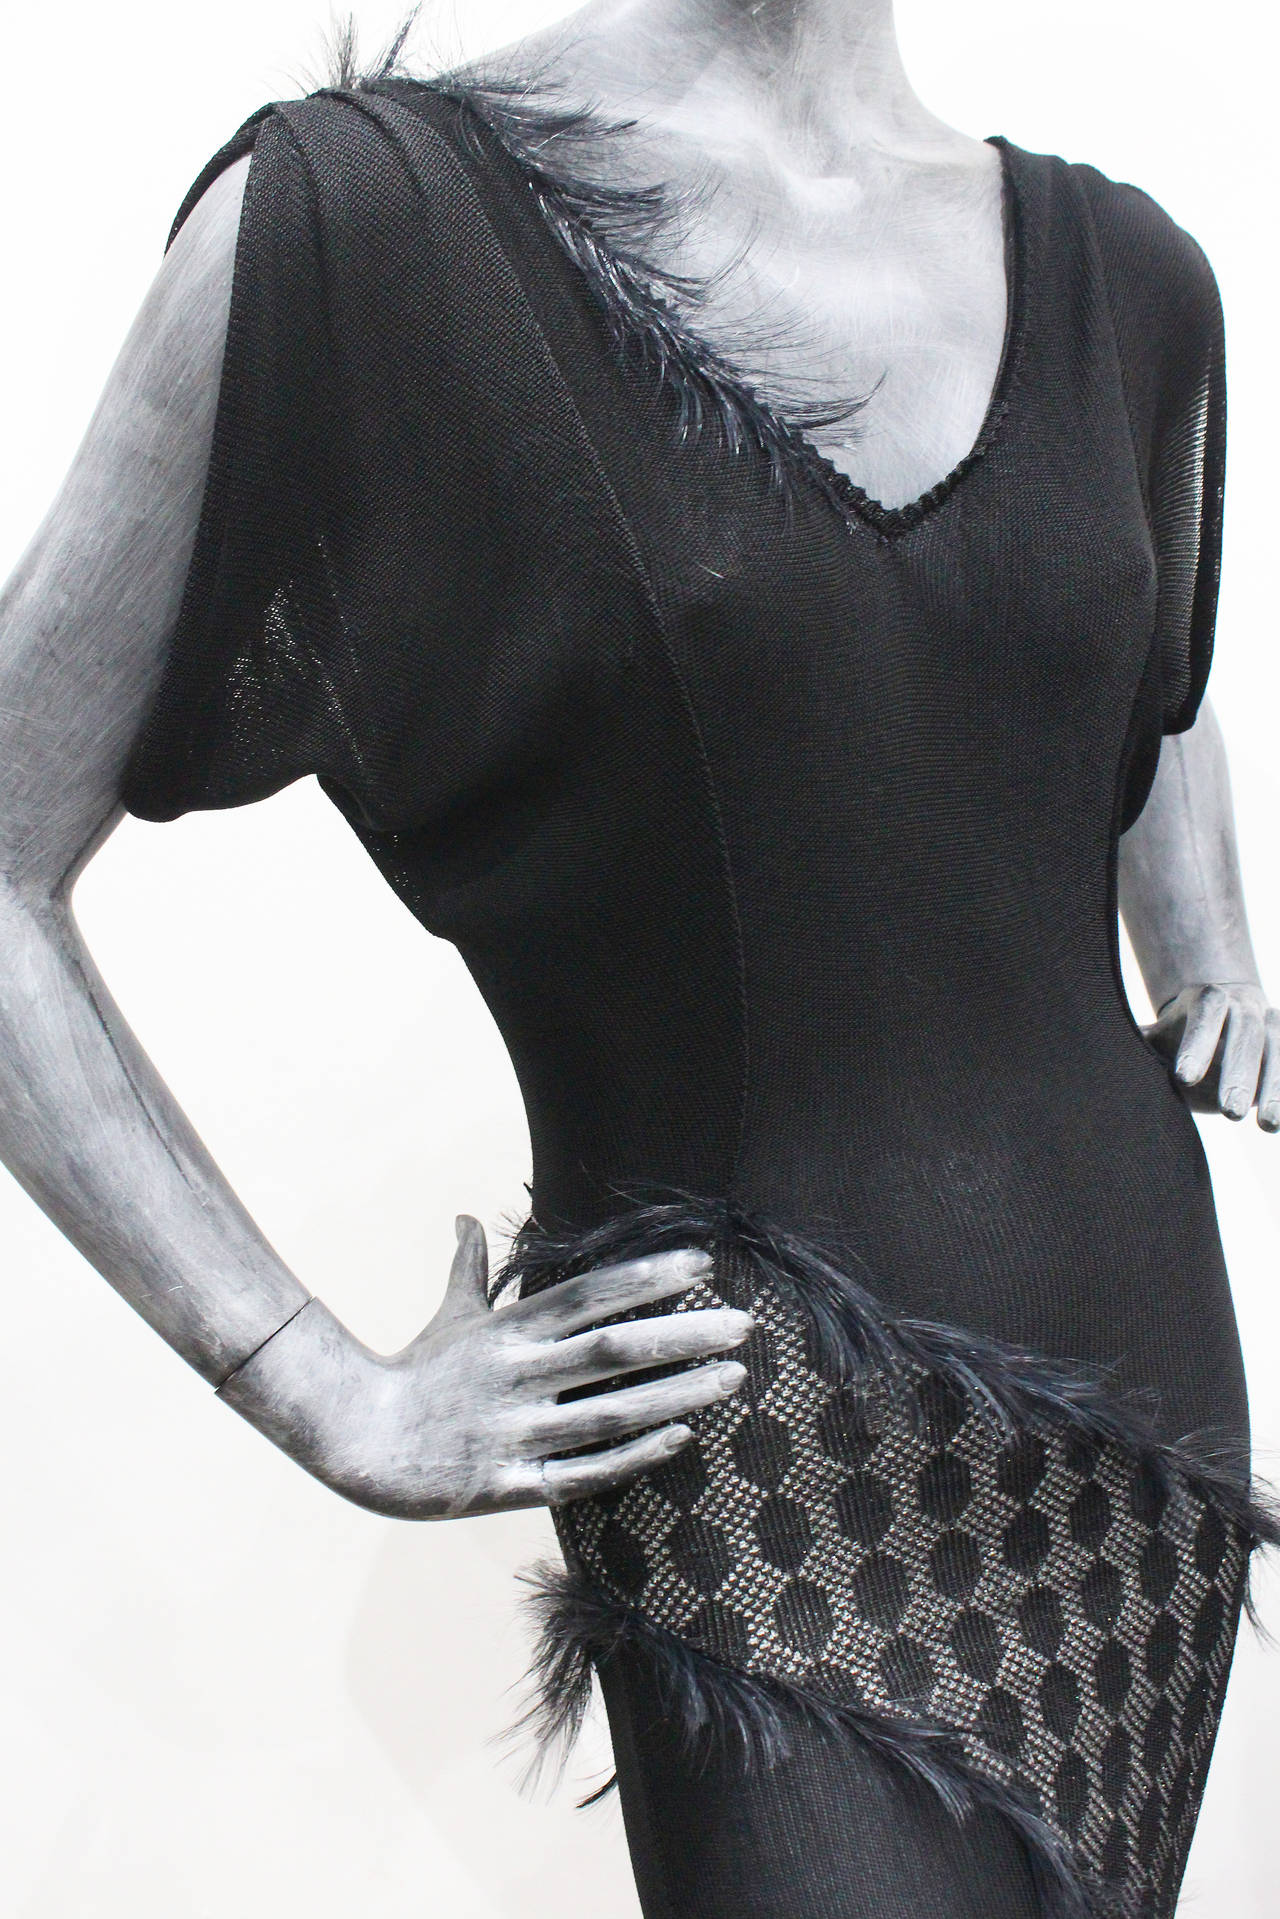 A viscose and lurex evening knit dress by British knitwear designer Julien Macdonald, designed in the 1990s. The dress is cut on the bias and has black feathers appearing on the seams. 

SIZING: Small Approx. EU 34 - 36 / UK 6 - 8 / US 4 - 6